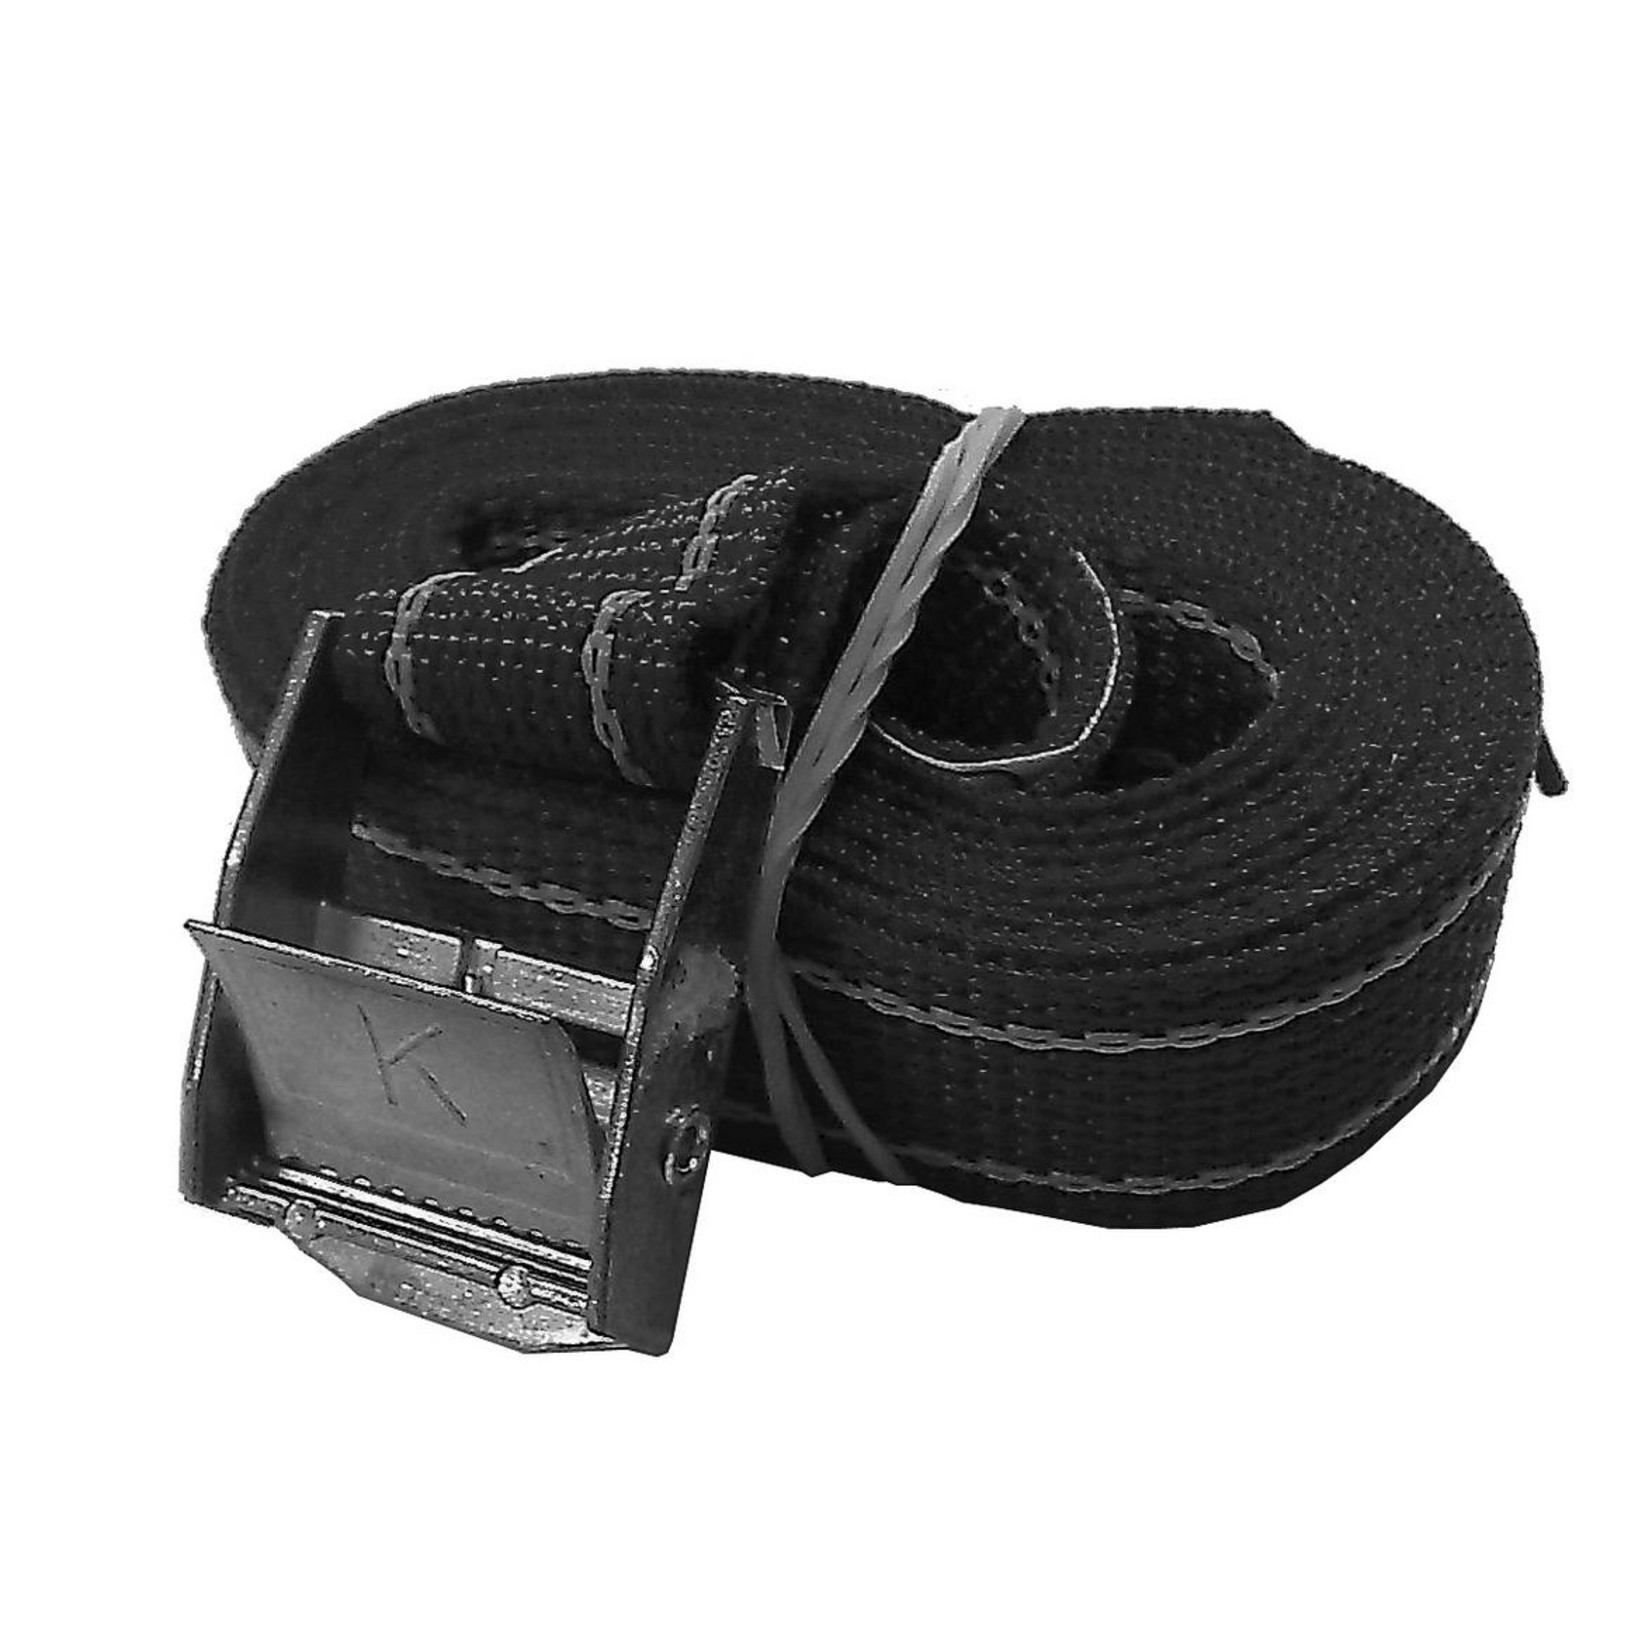 U-Rope General purpose strap with snap buckle. 25mm x 2.5m. black